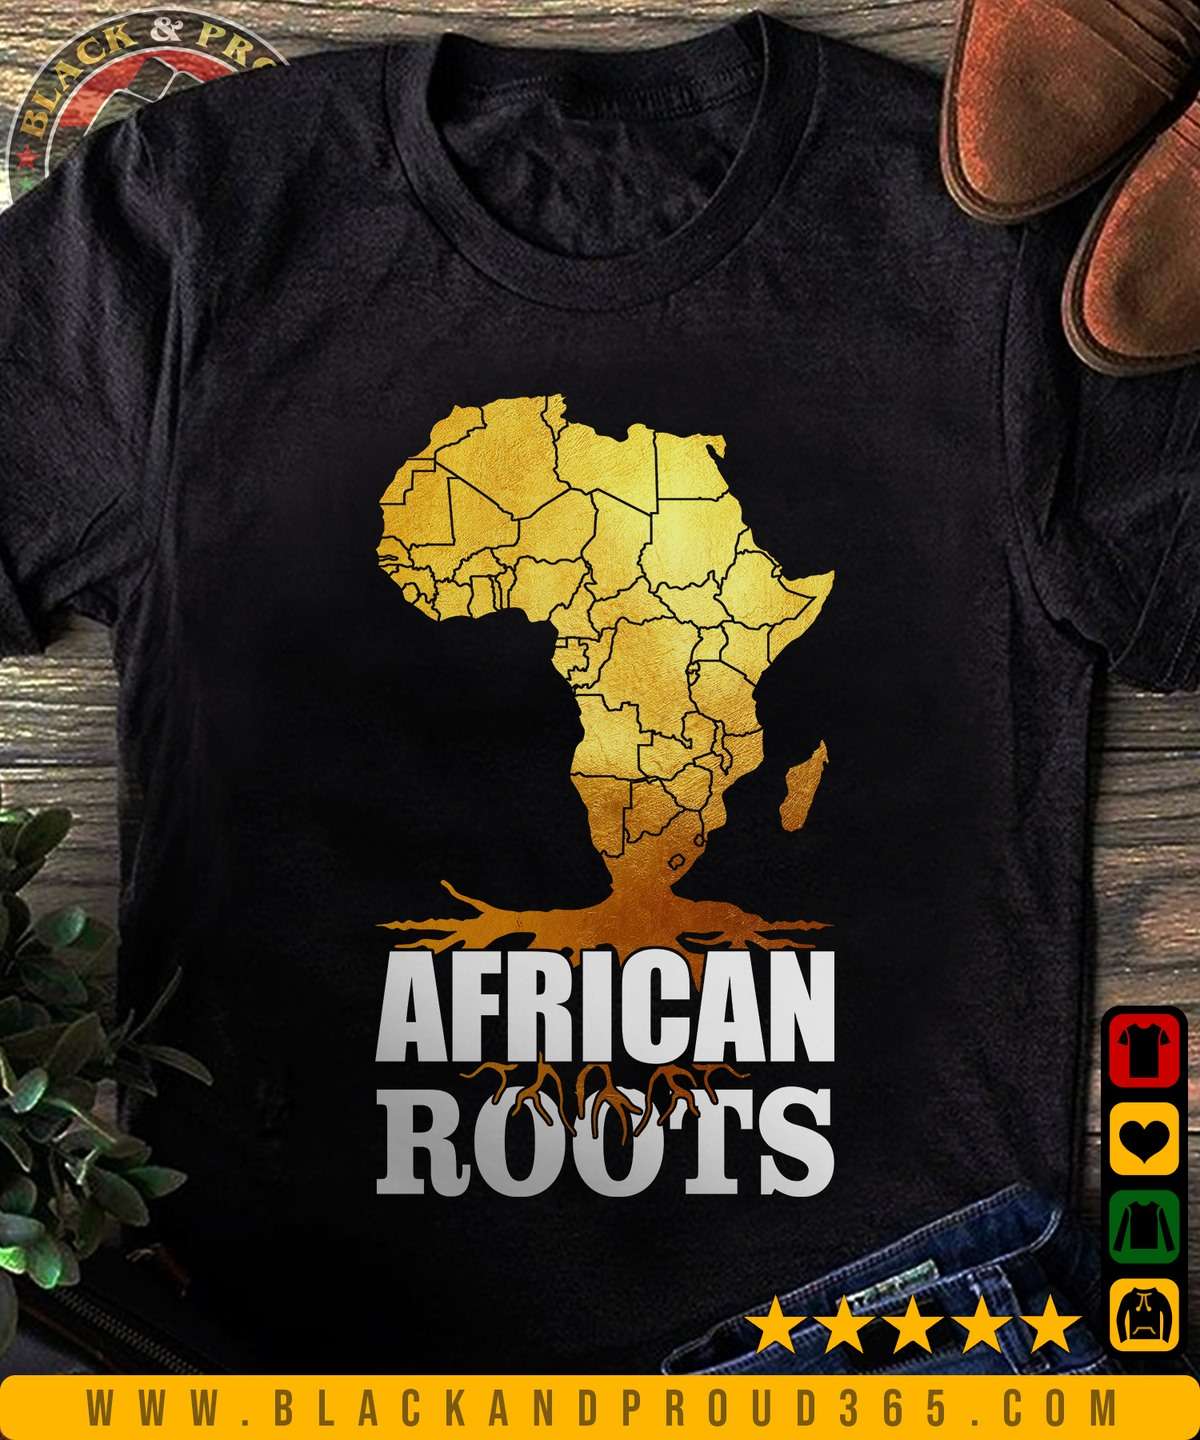 African roots - African the map, T-shirt gift for African